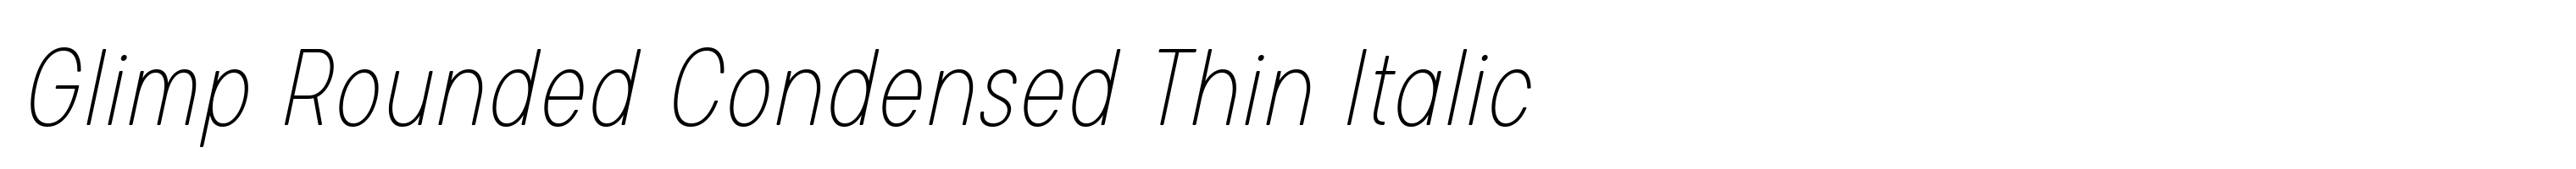 Glimp Rounded Condensed Thin Italic